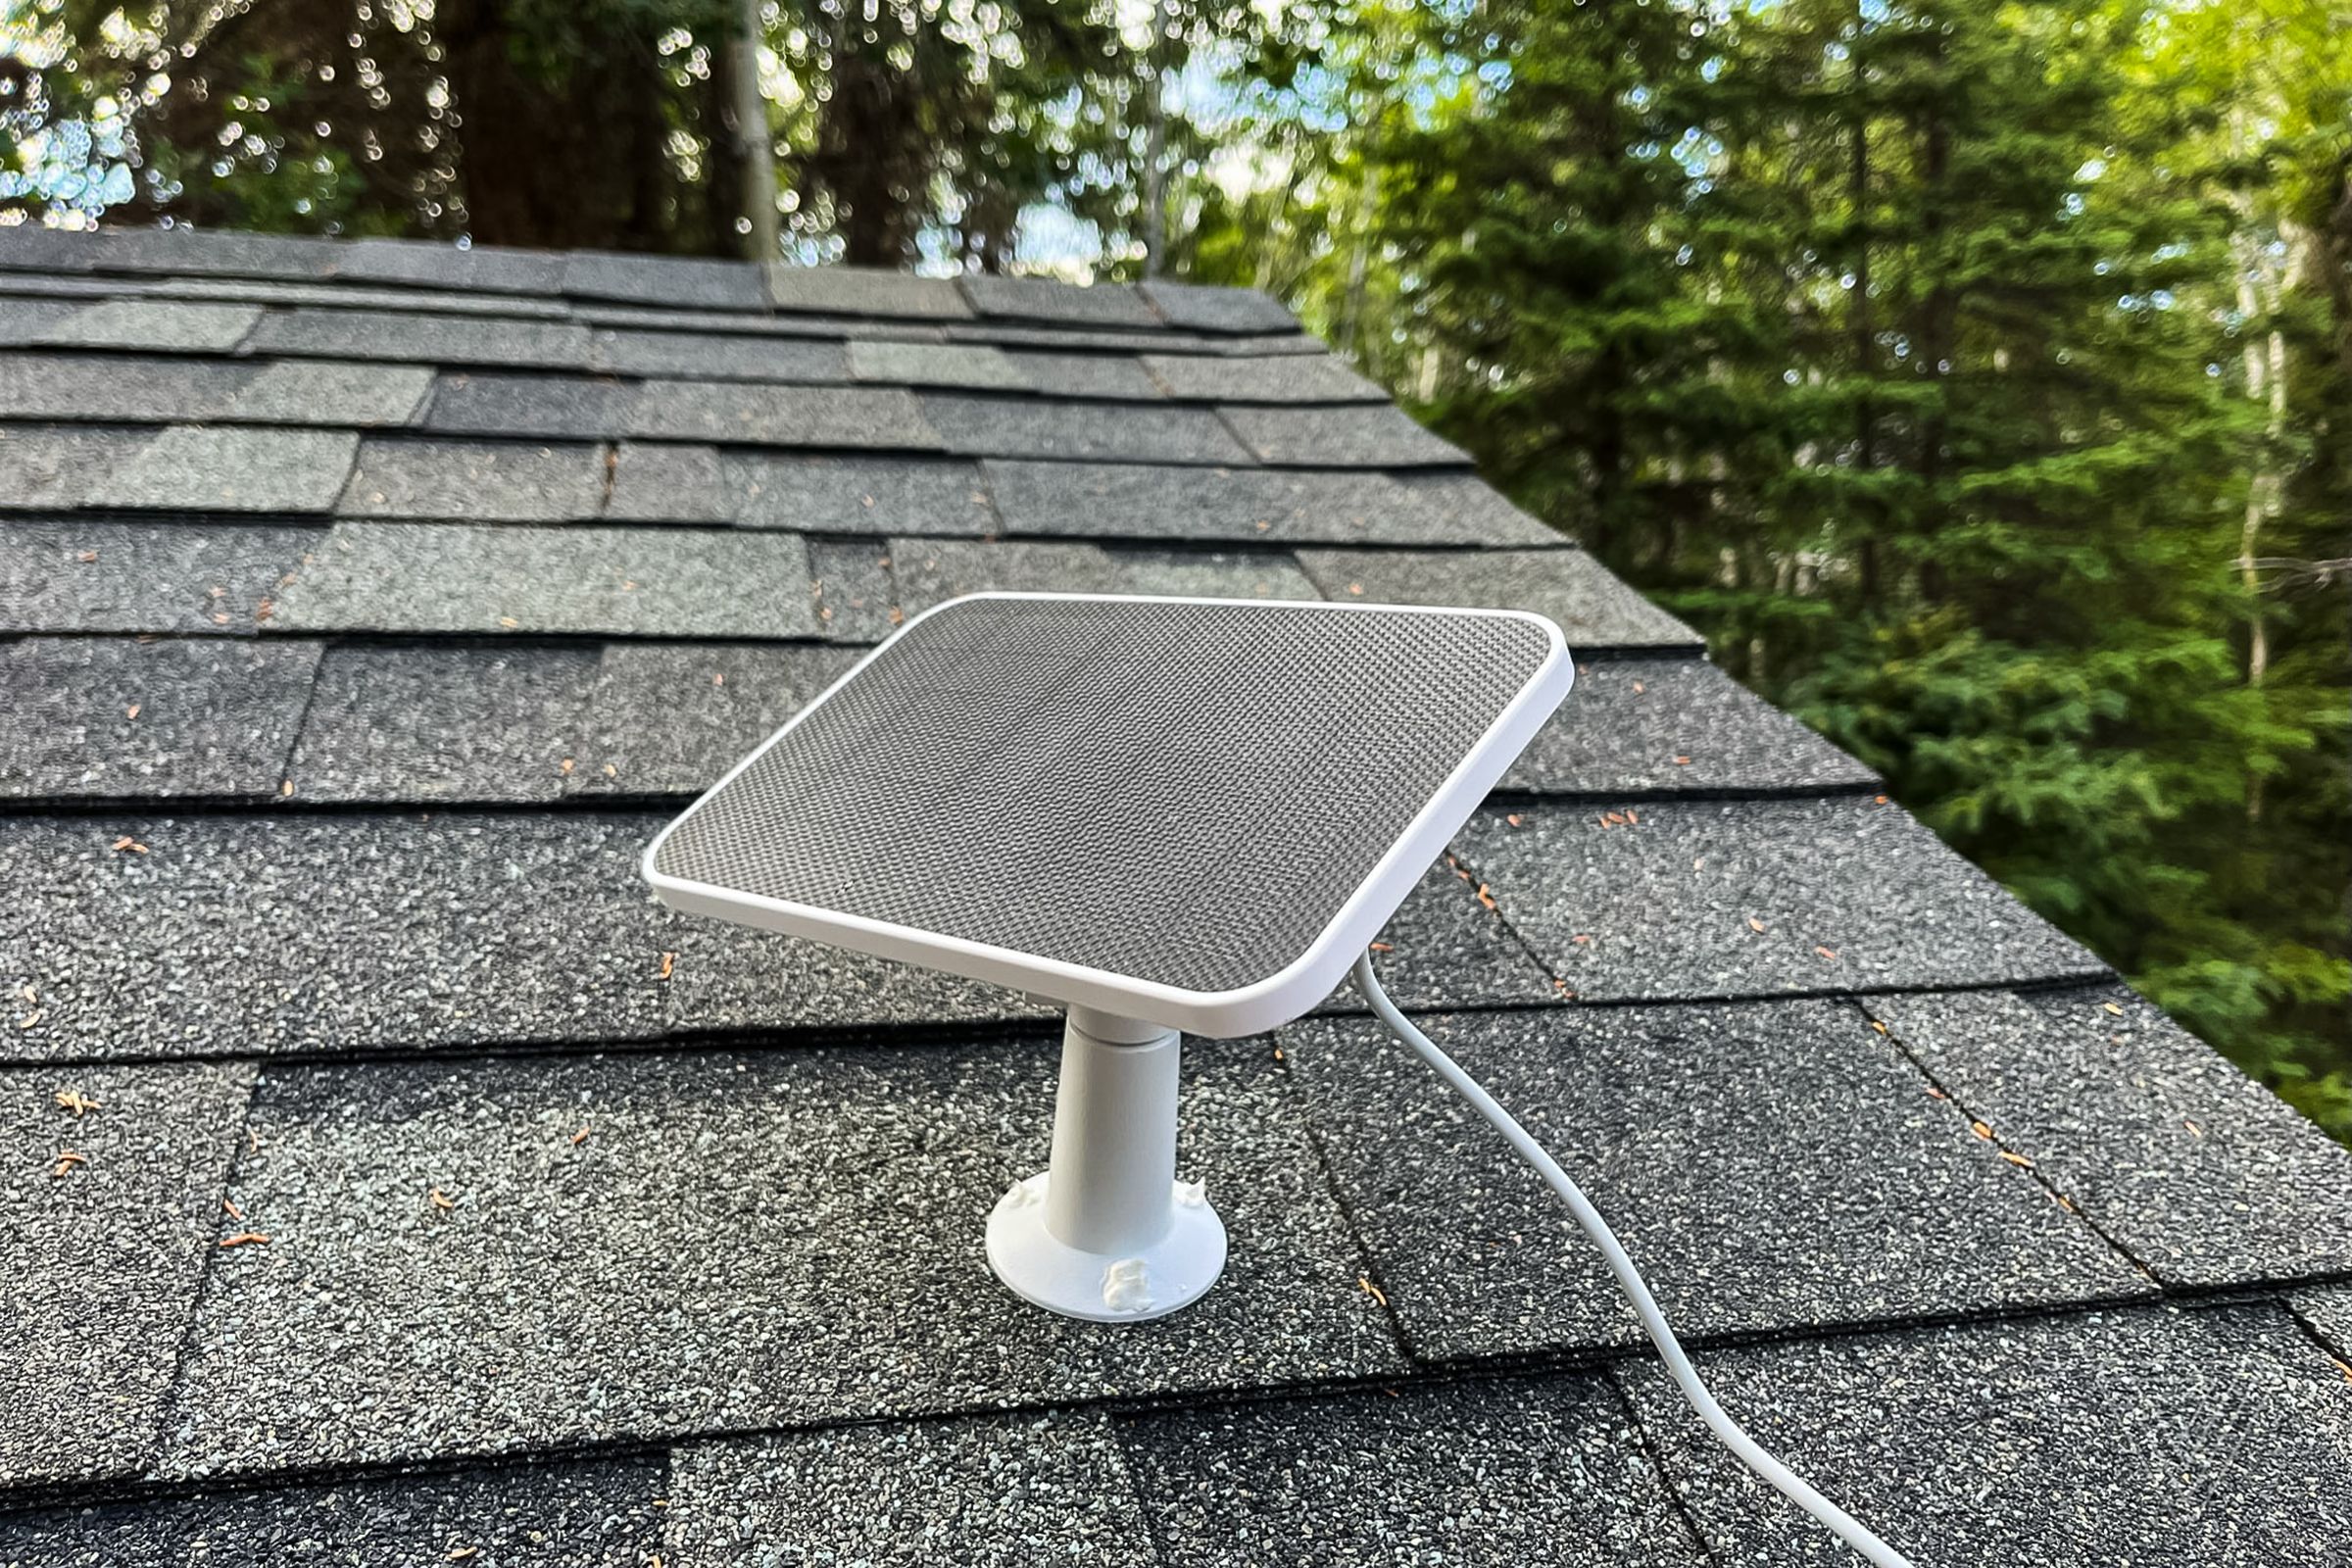 I tested the Eufy camera with its compatible solar panel charger, and it kept the camera charged above 90 percent during one week of testing.